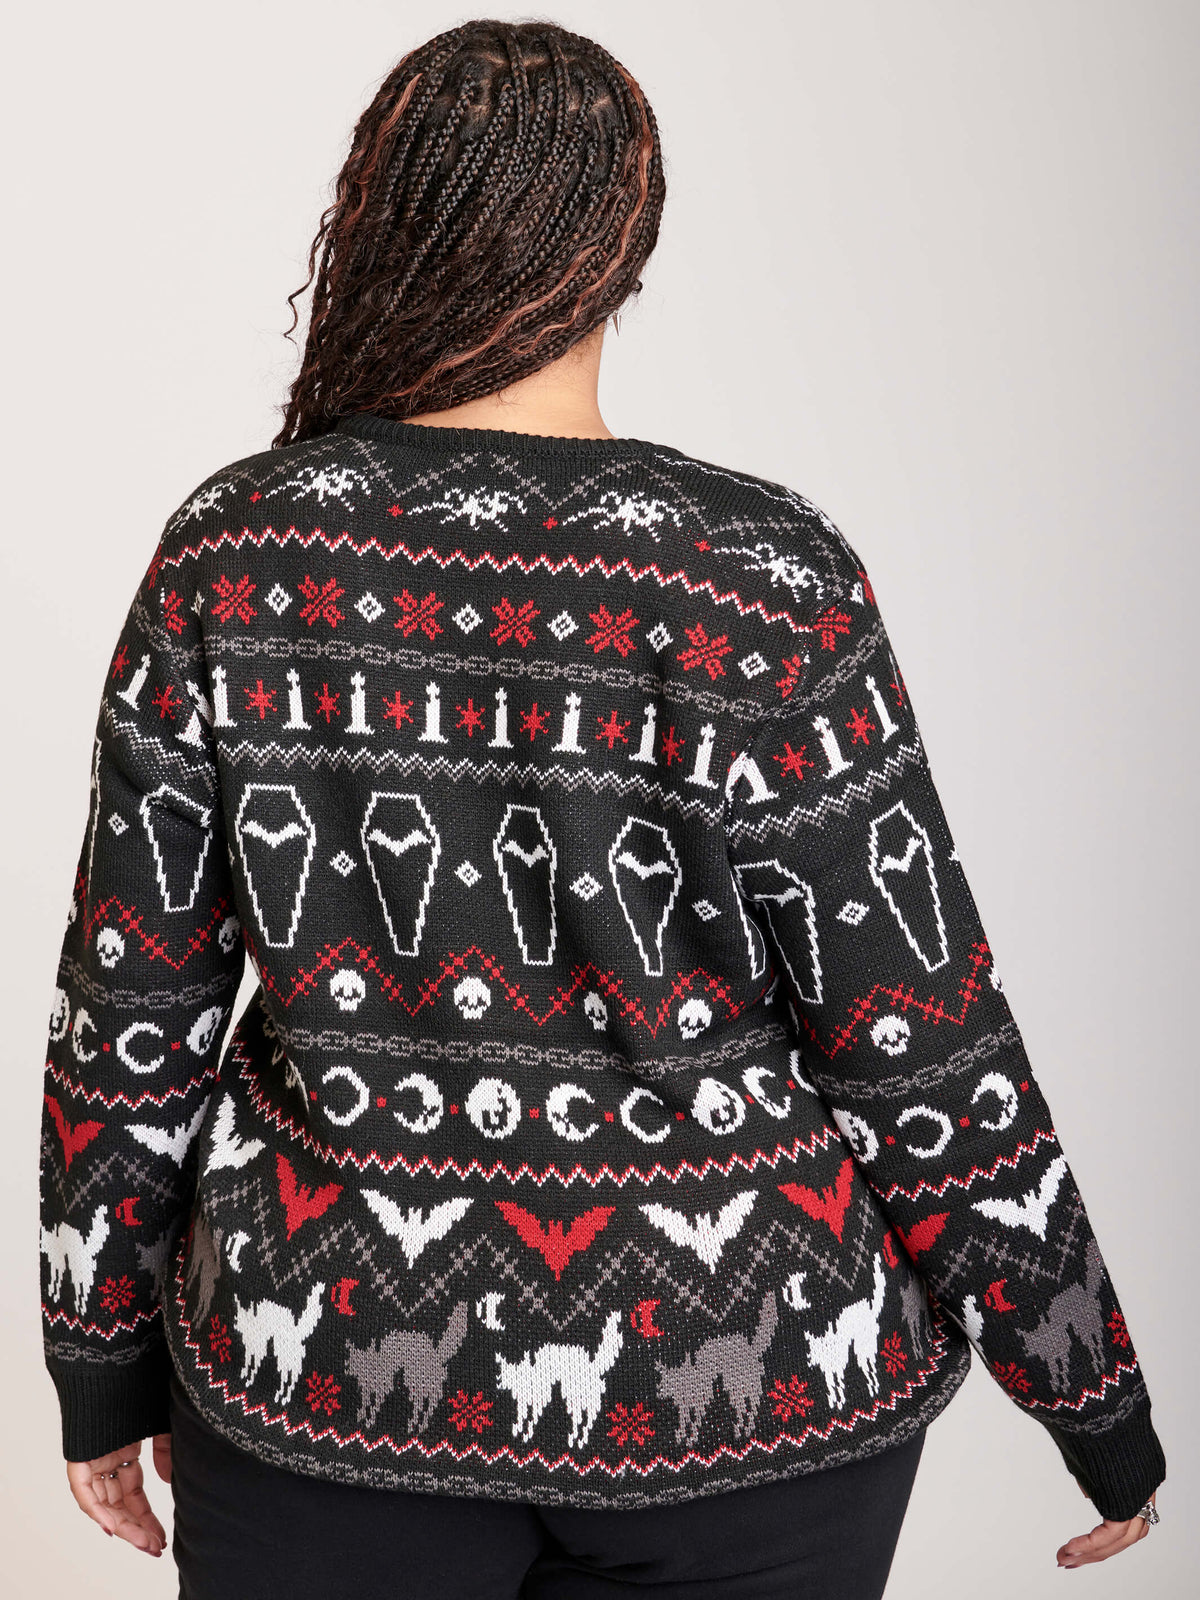 christmas sweater with cats, cats and moon phase